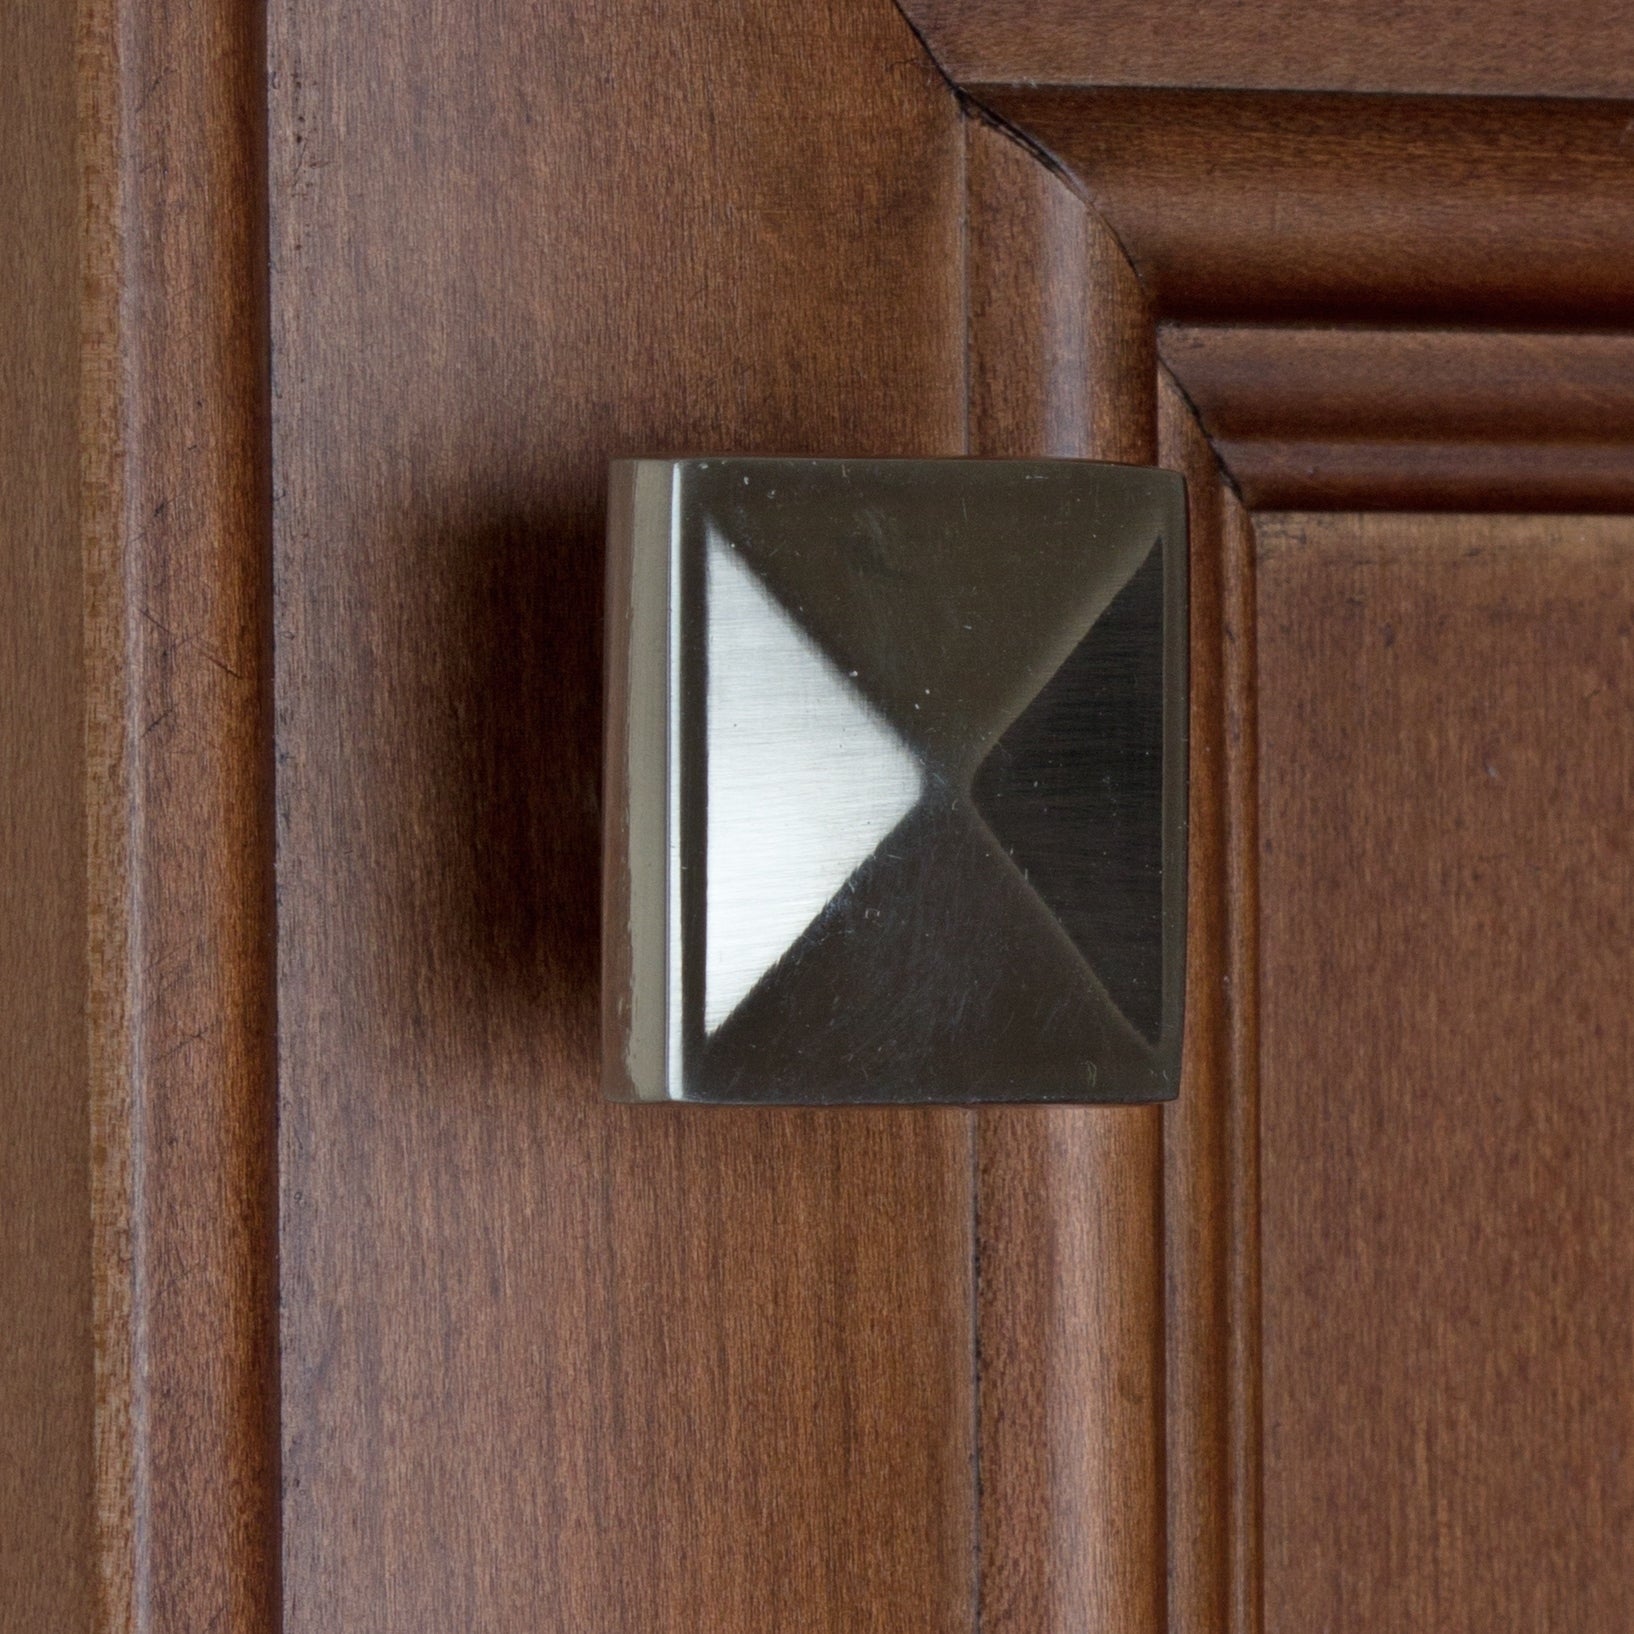 GlideRite 1-1/4 in. Classic Square Pyramid Cabinet Knobs, Satin Nickel, Pack of 25 - image 4 of 5